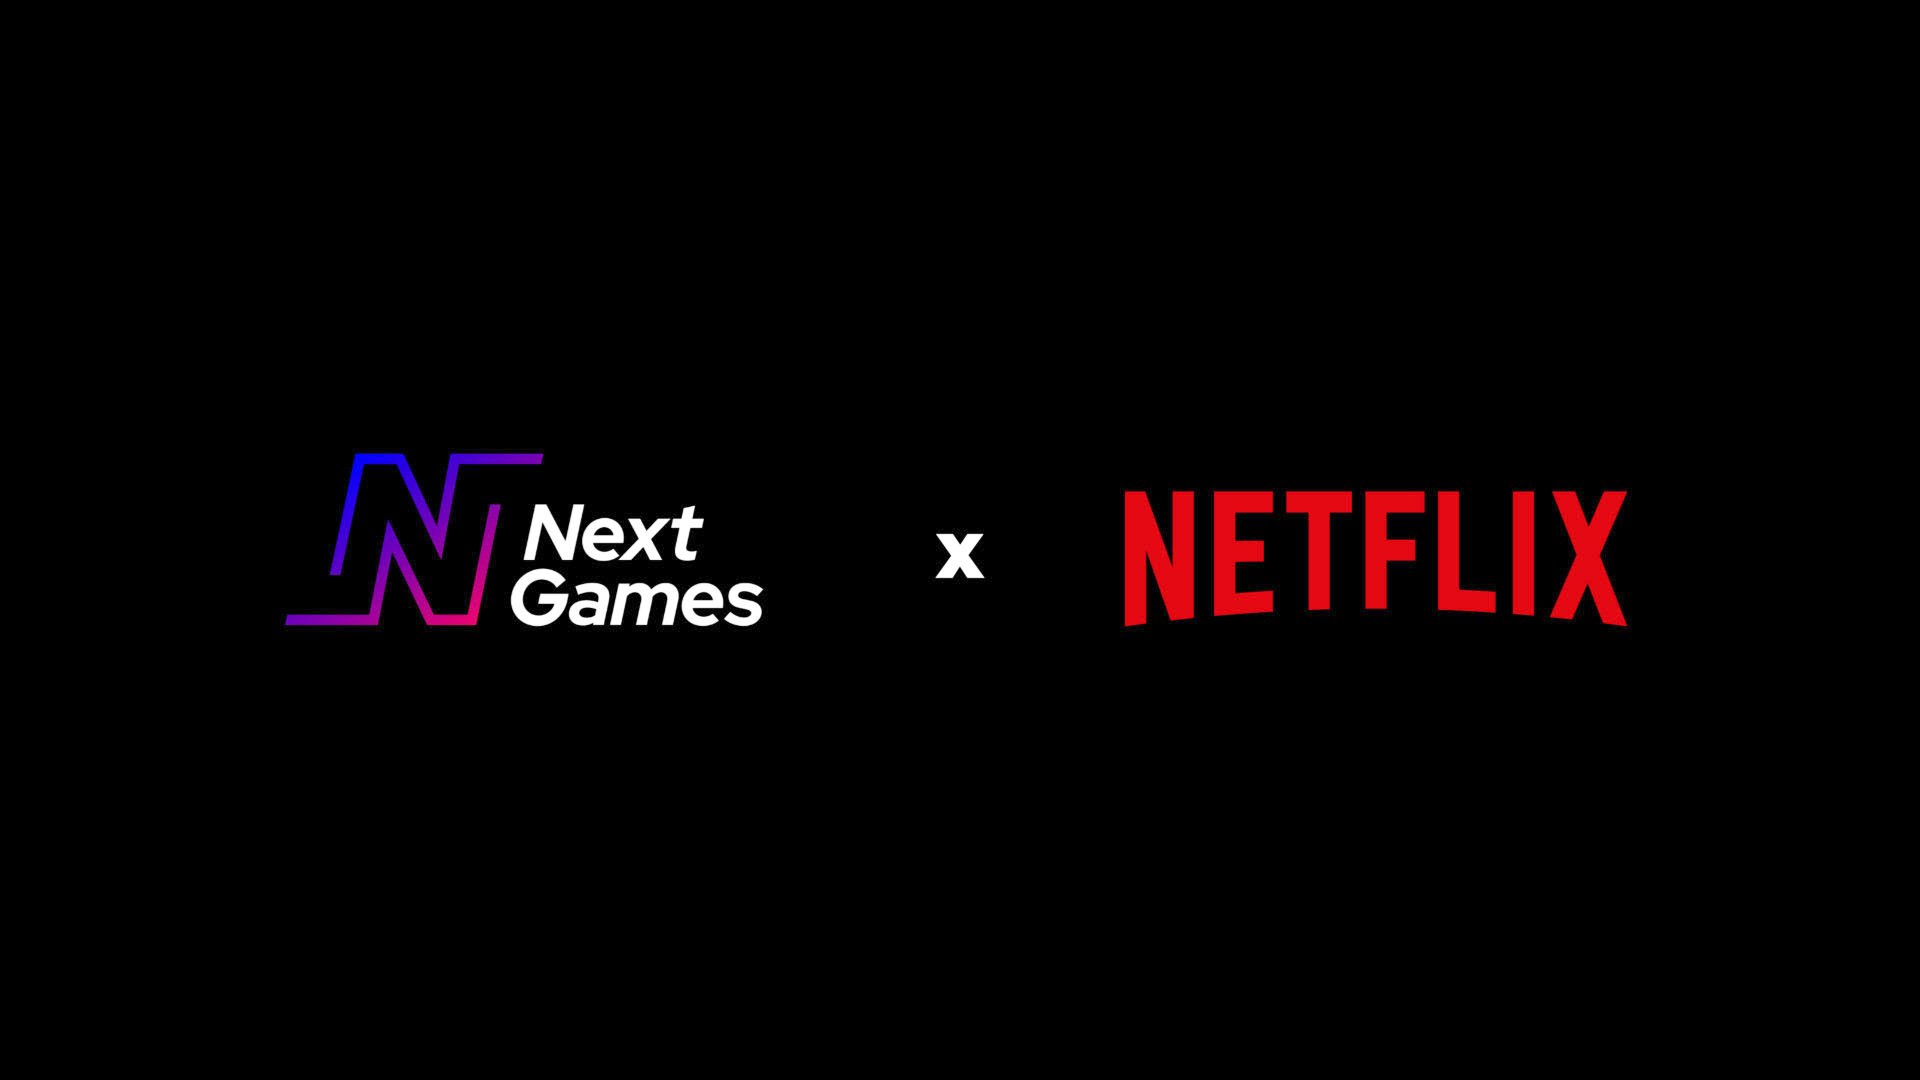 #
      Netflix to acquire Next Games